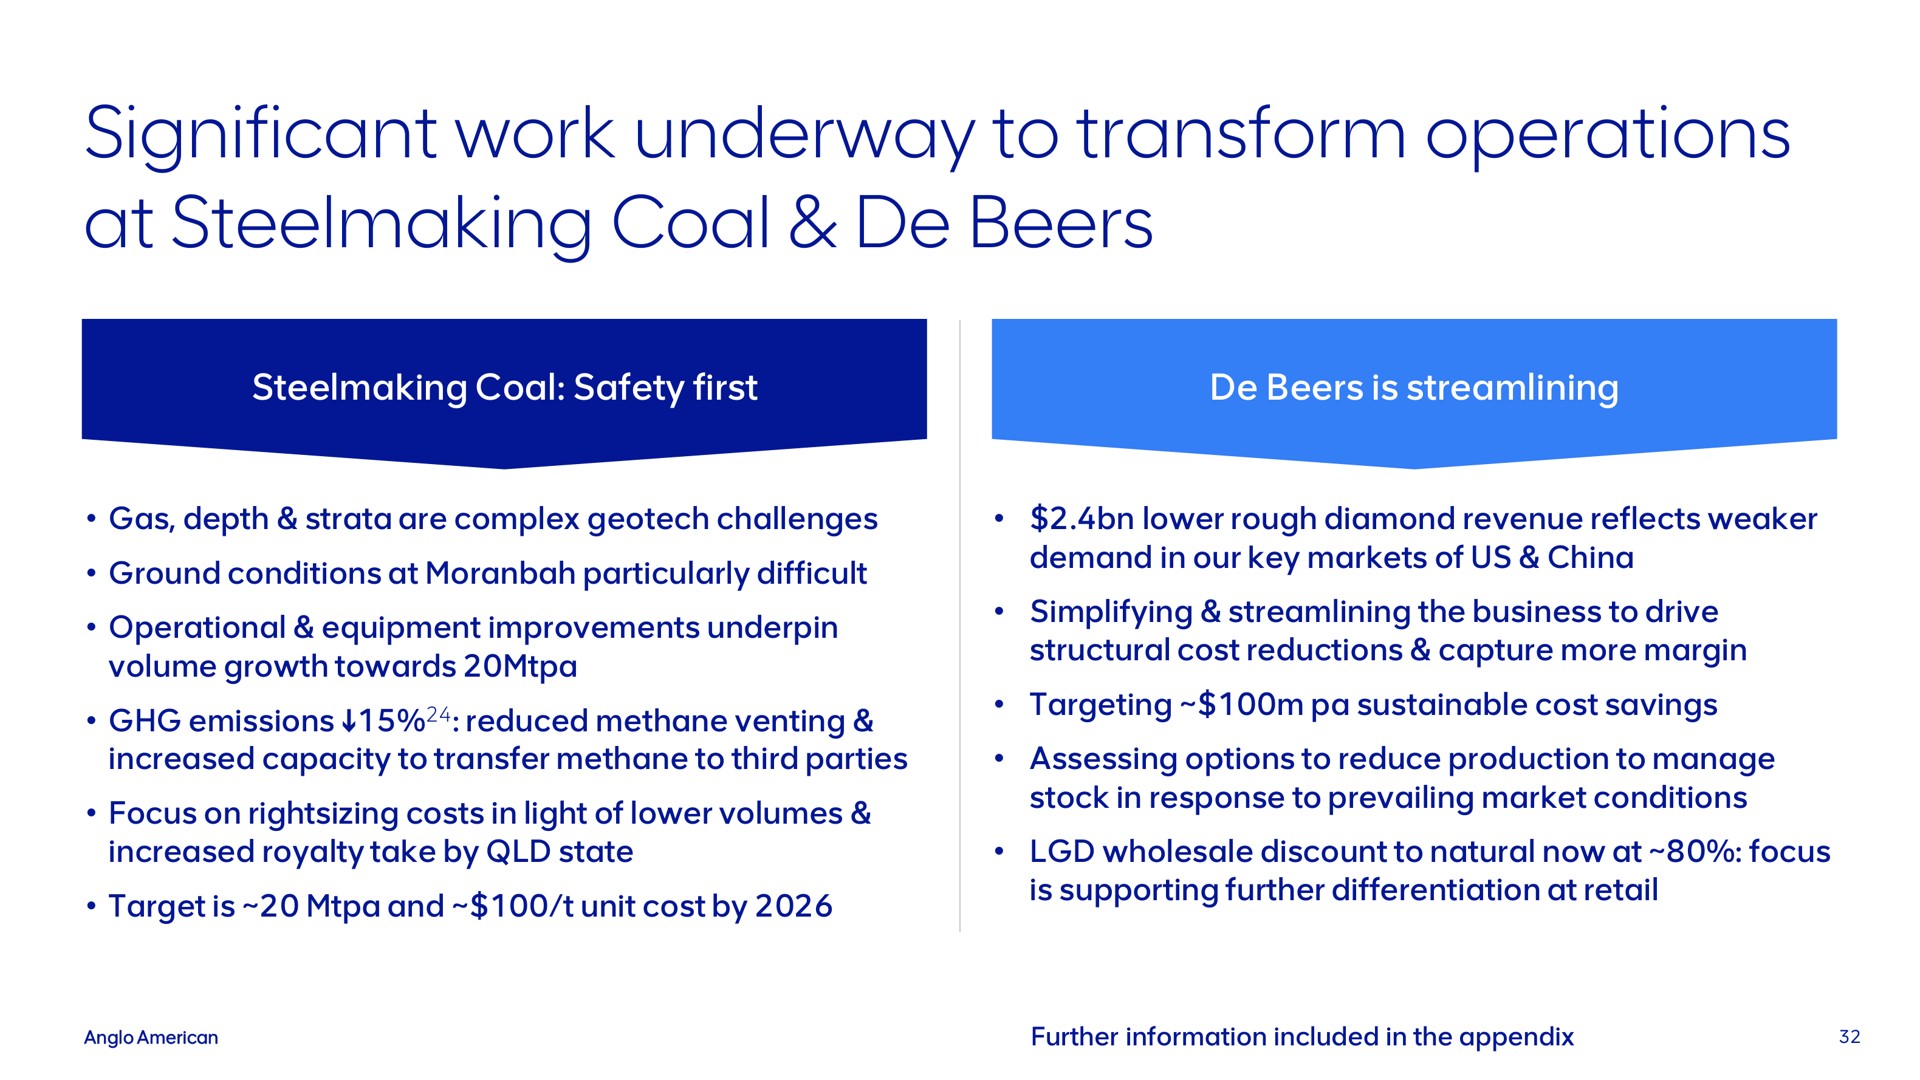 significant work underway to transform operations at steelmaking coal beers | AngloAmerican